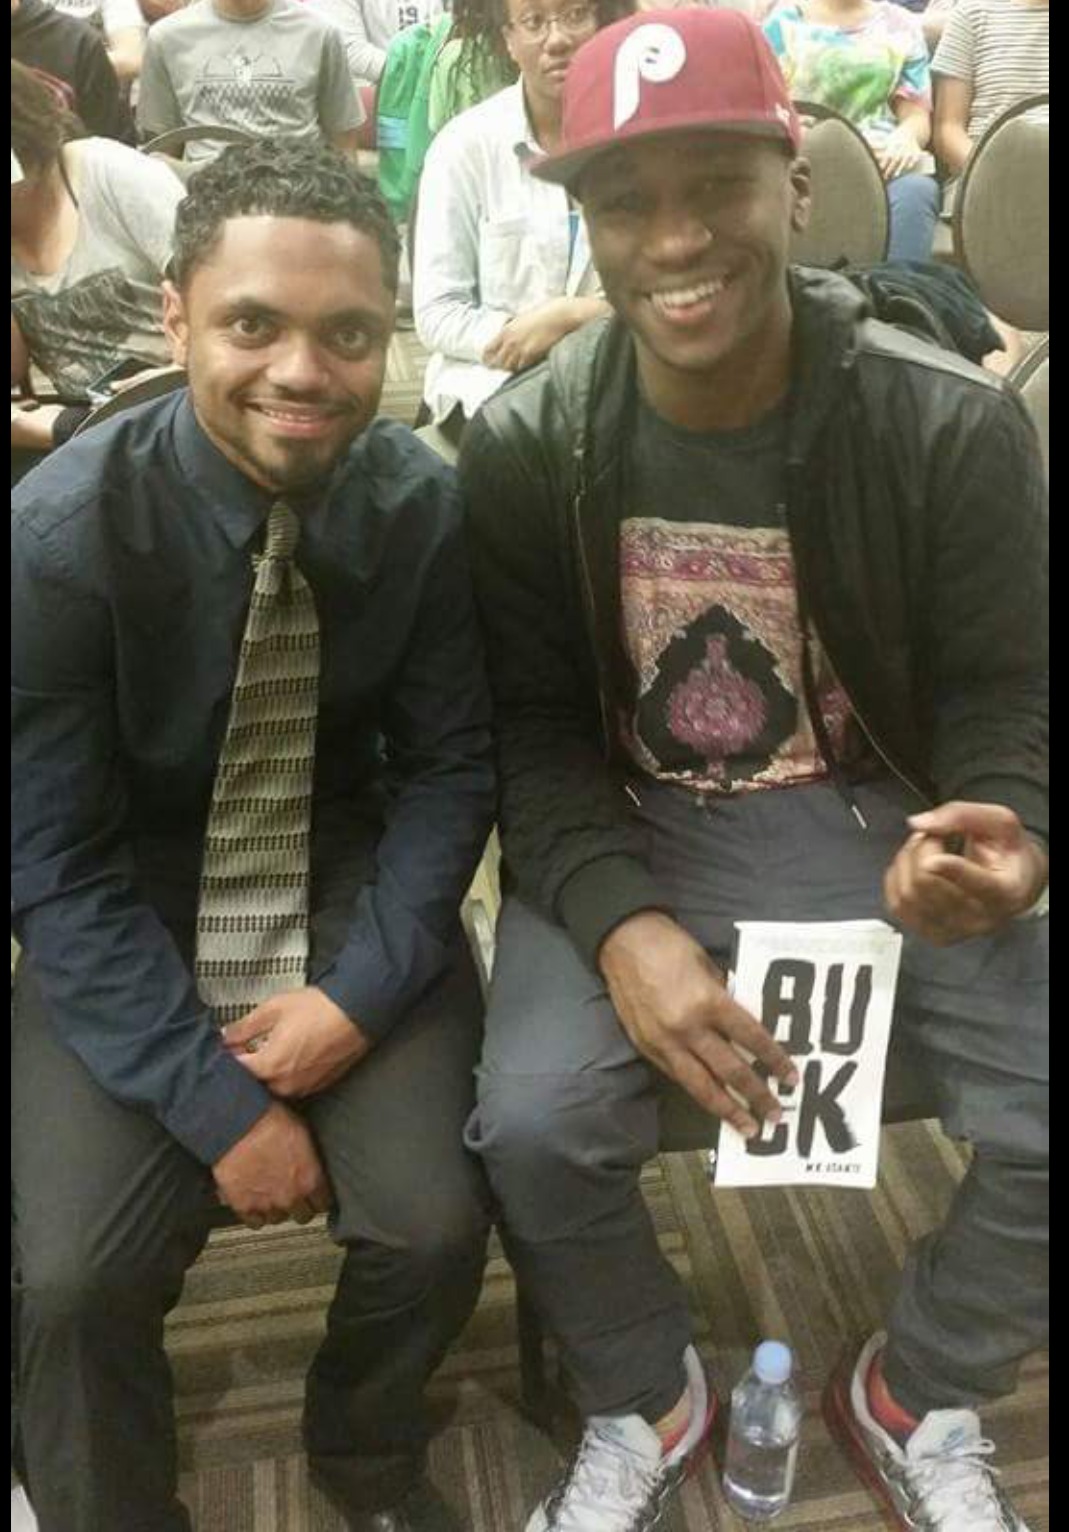 Writer, educator and filmmaker MK Asante and I at his book signing and discussion held at Jacobs Center in Southeast San Diego.